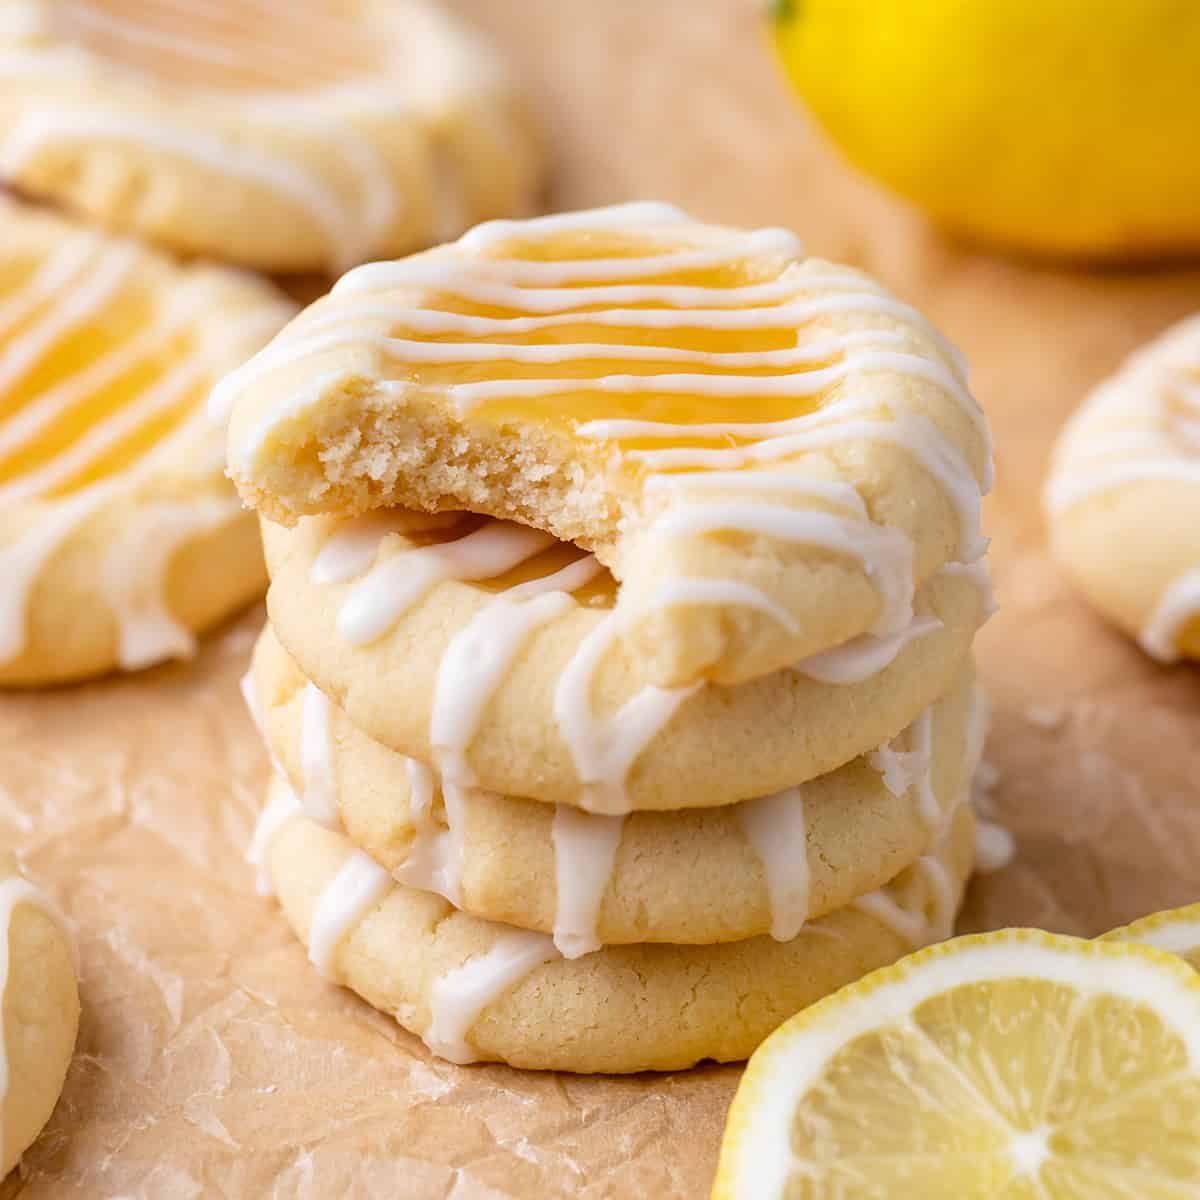 a stack of 4 Lemon Curd Cookies, the top one has a bite taken out of it